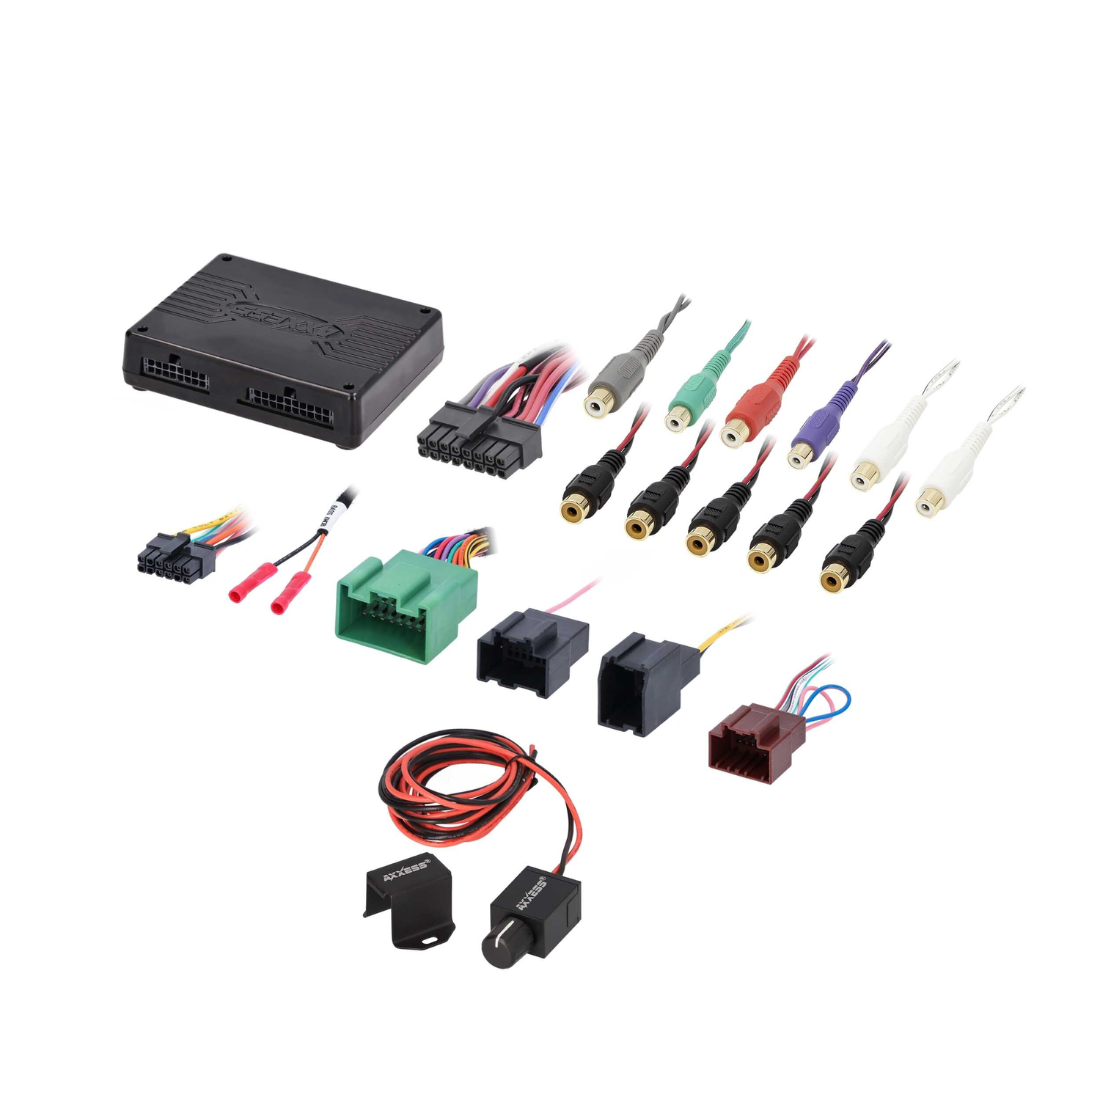 Axxess AXDSPX-GMM50 DSP Package Interface Harness for Select GM w/ BOSE 2014-19